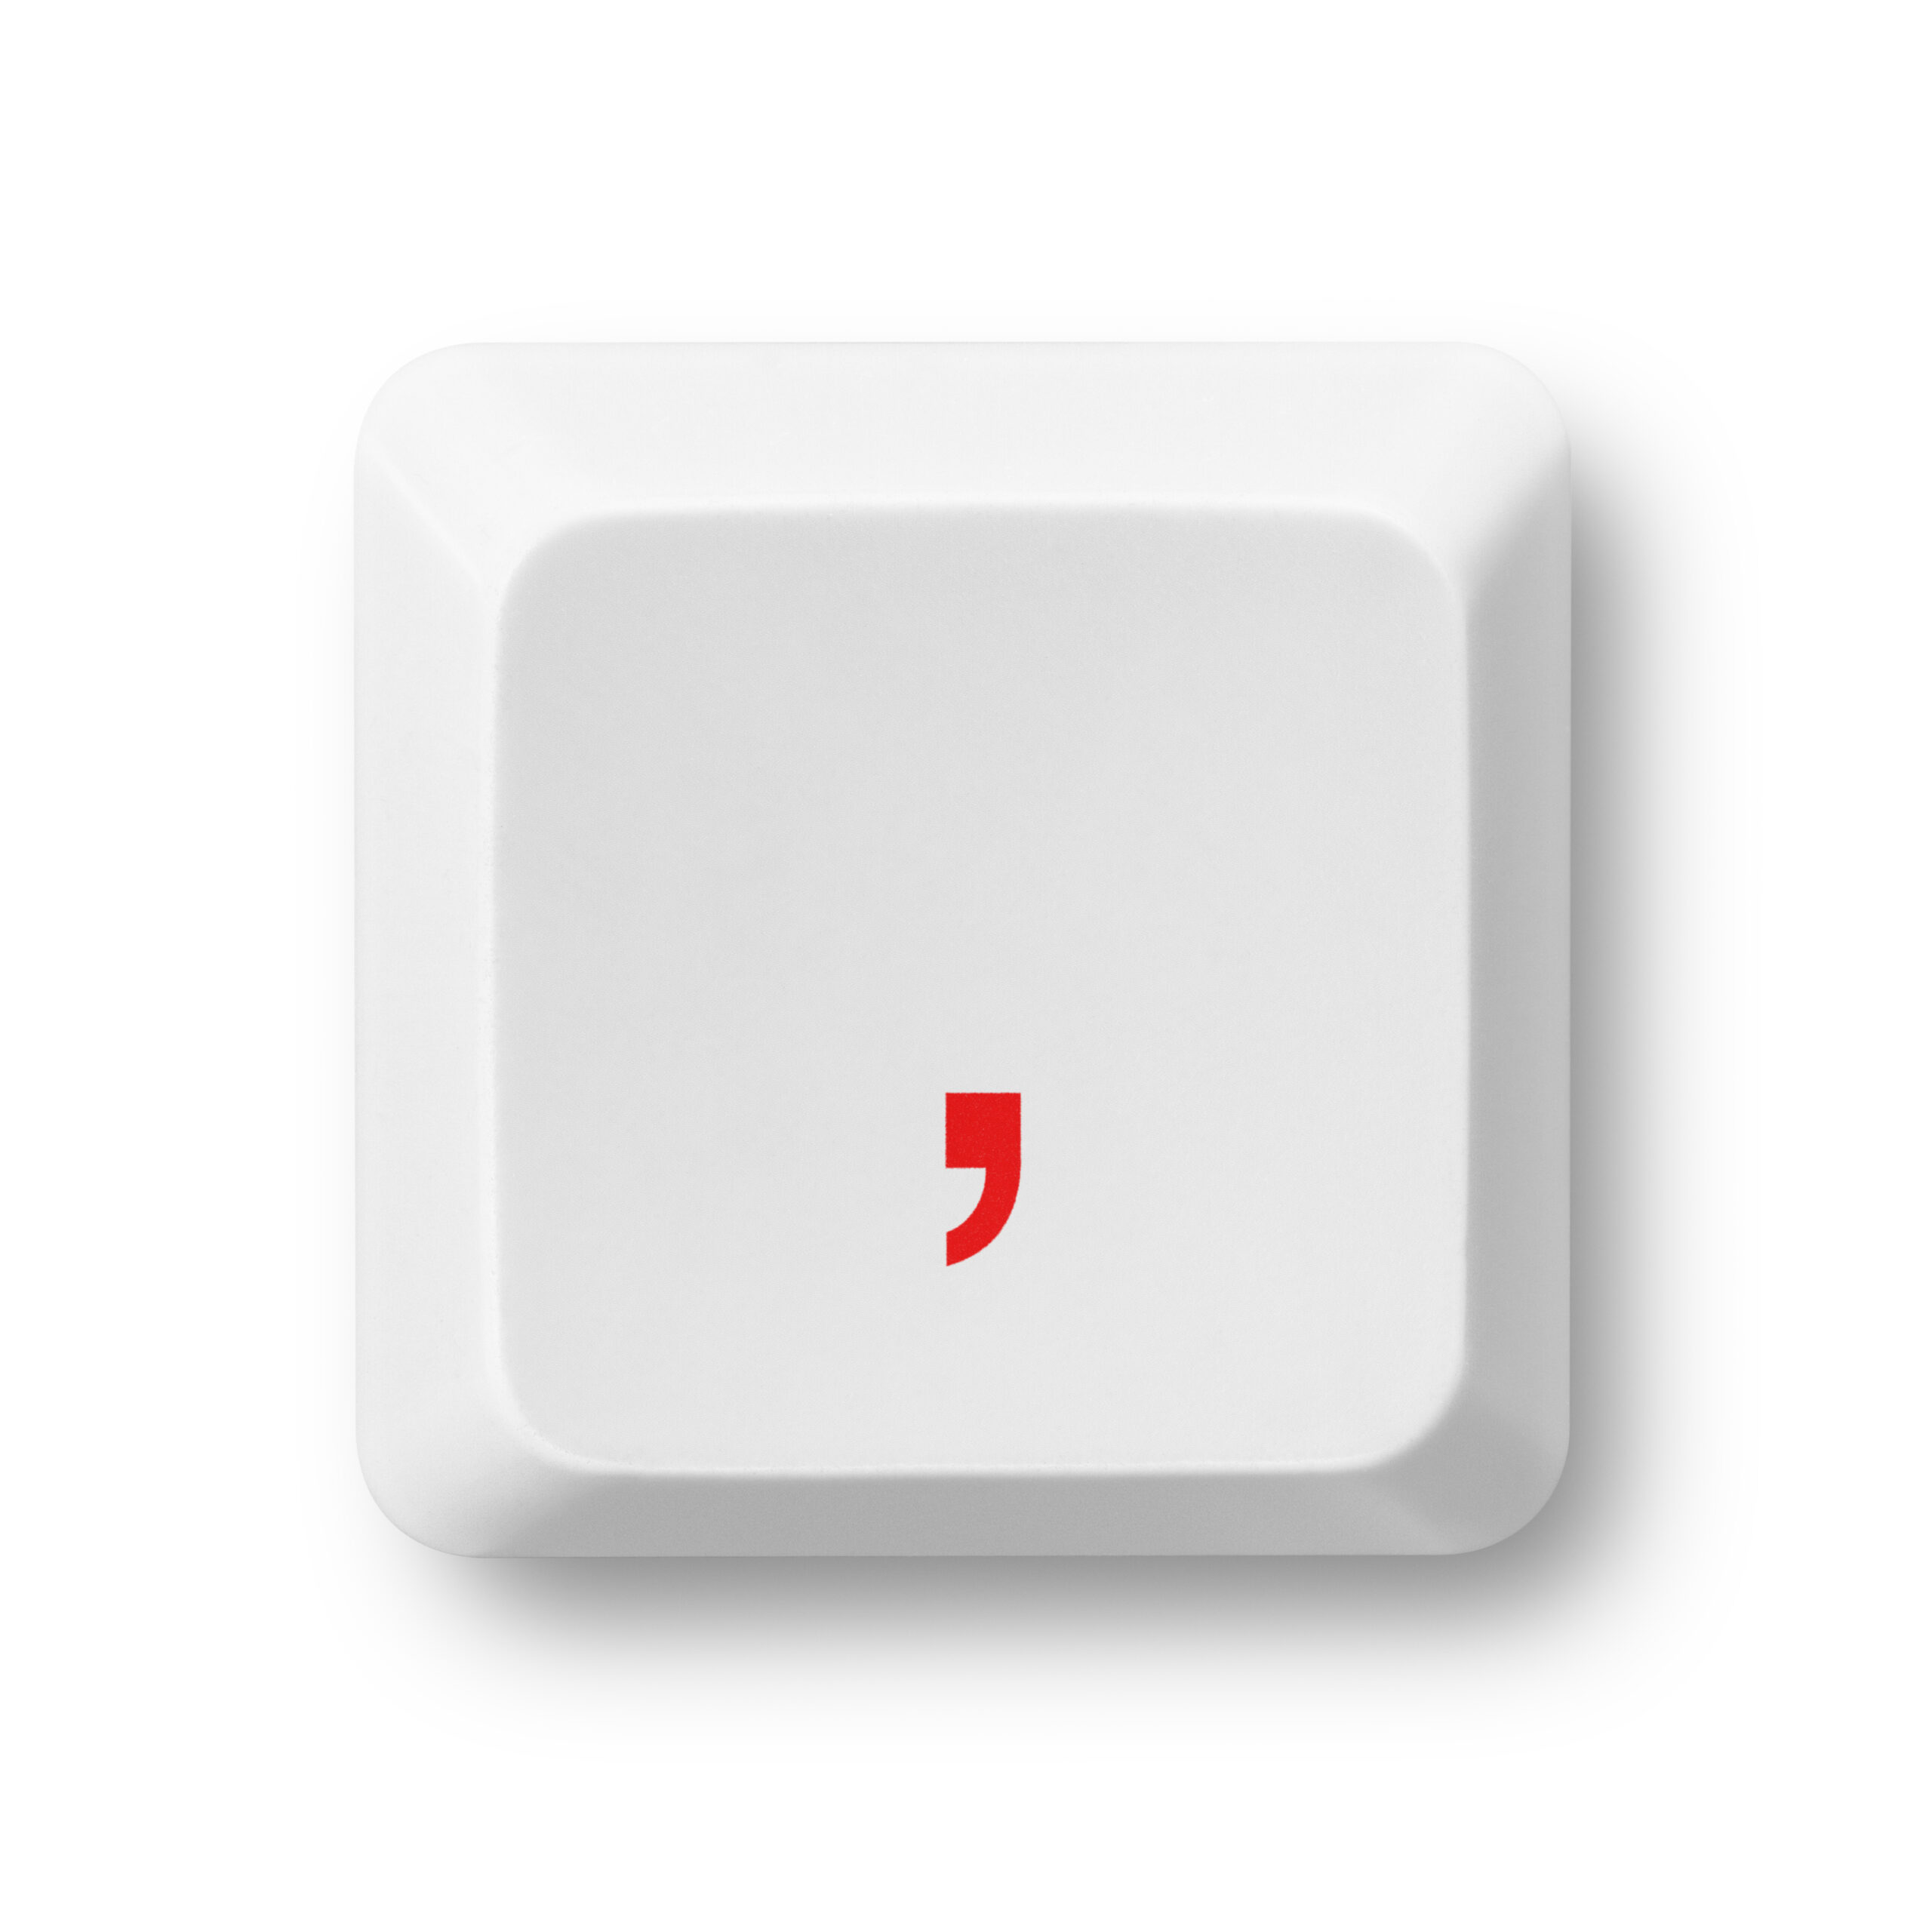 A white keyboard key with a red comma